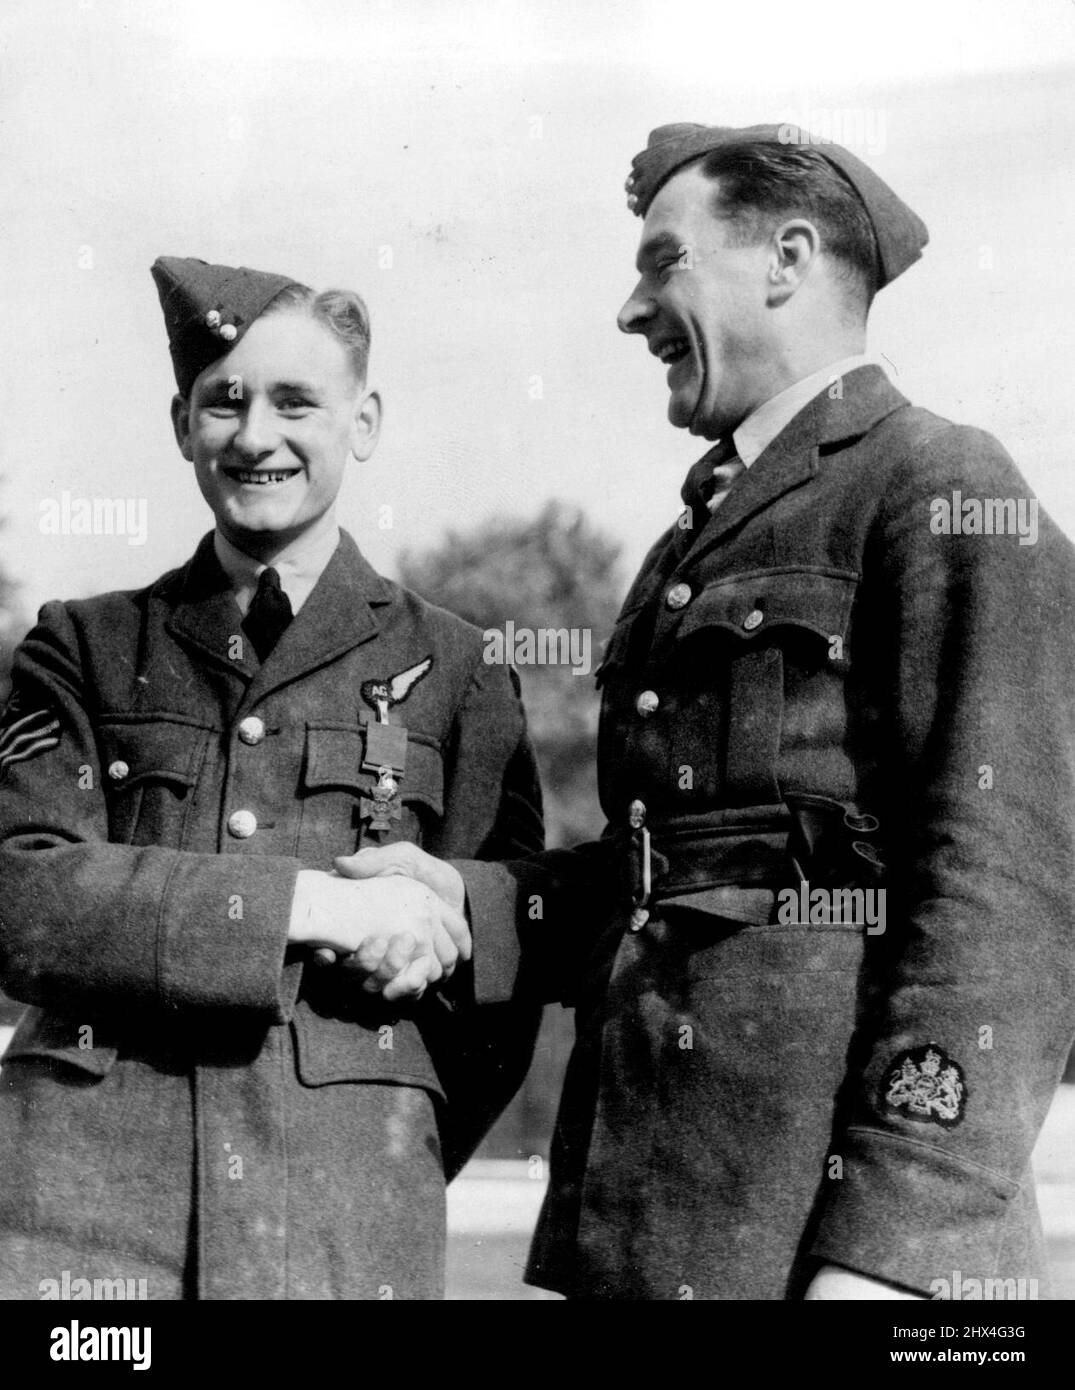 Sergeant Hannah Receives V.C. From The King: Sergeant John Hannah (left) congratulated by a Royal Air Force warrant officer as he left Buckingham Palace wearing the Victoria Cross. Sergeant John Hannah, 18-year-old air gunner of the Royal Air Force, went to Buckingham Palace to receive the Victoria Cross awarded him in recognition of the valour he displayed when he remained behind in a bomber to put out a fire instead of baling out. Sergeant Hannah came to London especially for the occasion. October 10, 1940. Stock Photo